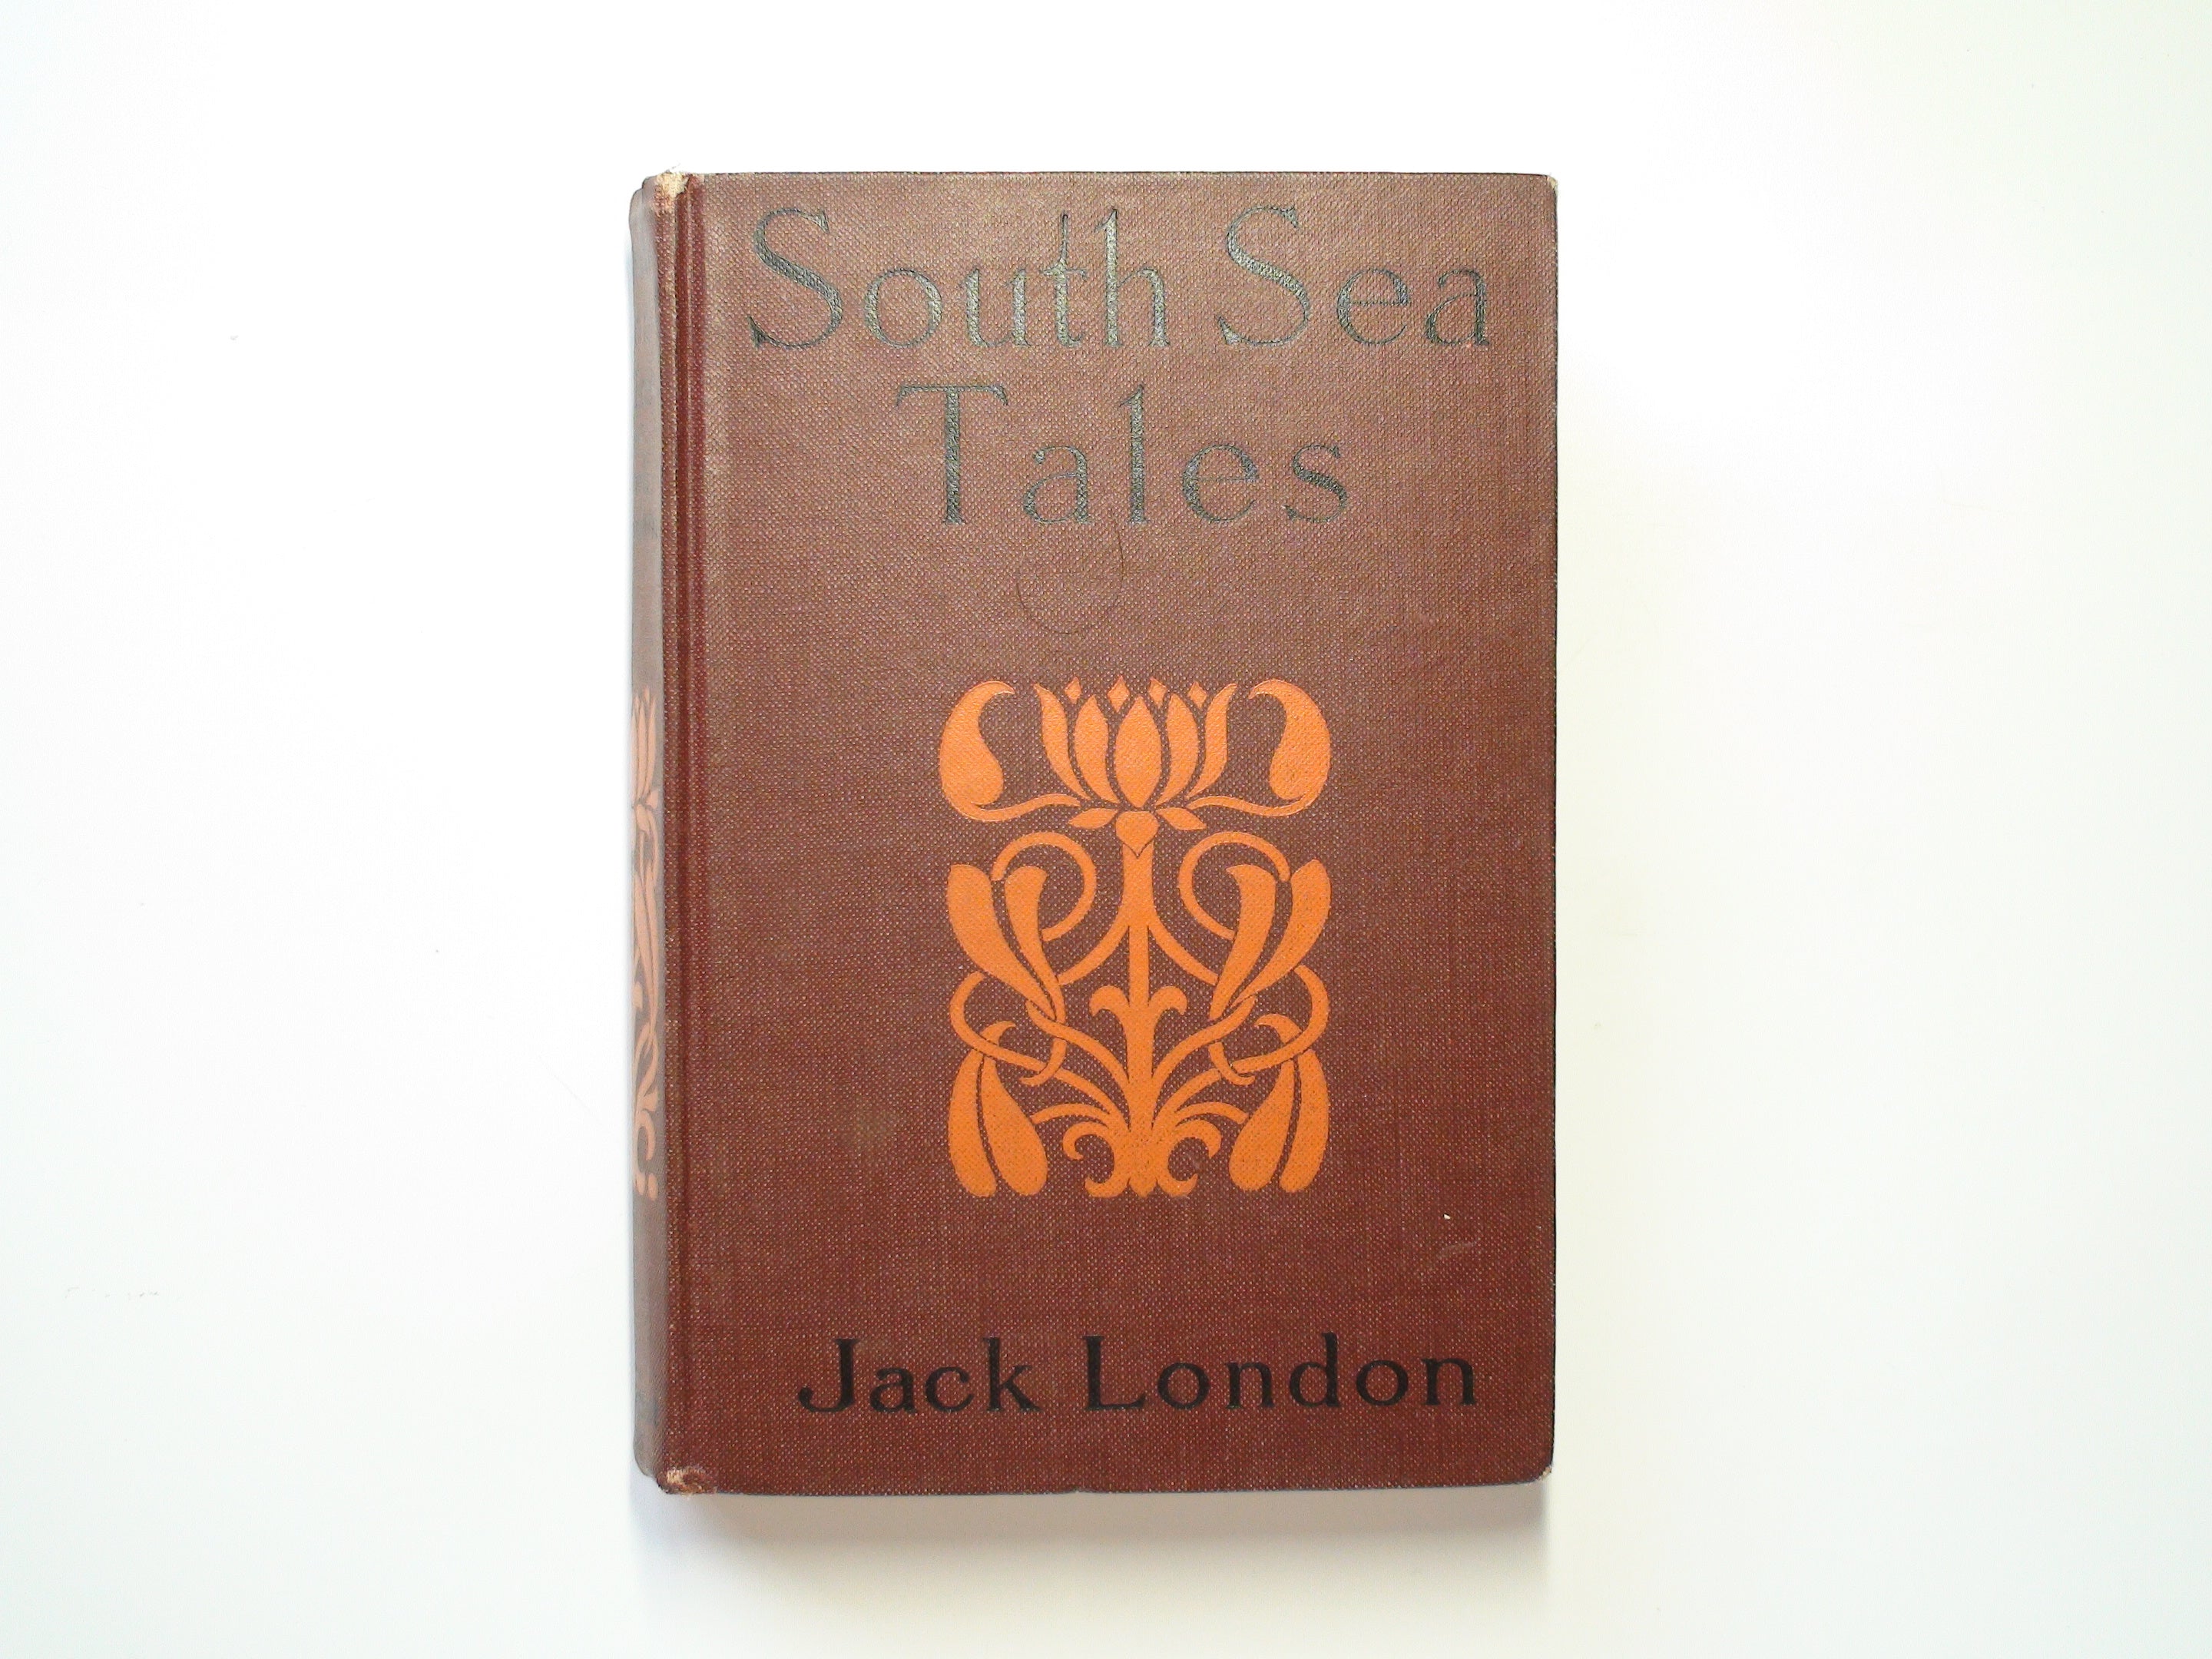 South Sea Tales, by Jack London, With Frontispiece, The Regent Press, 1911